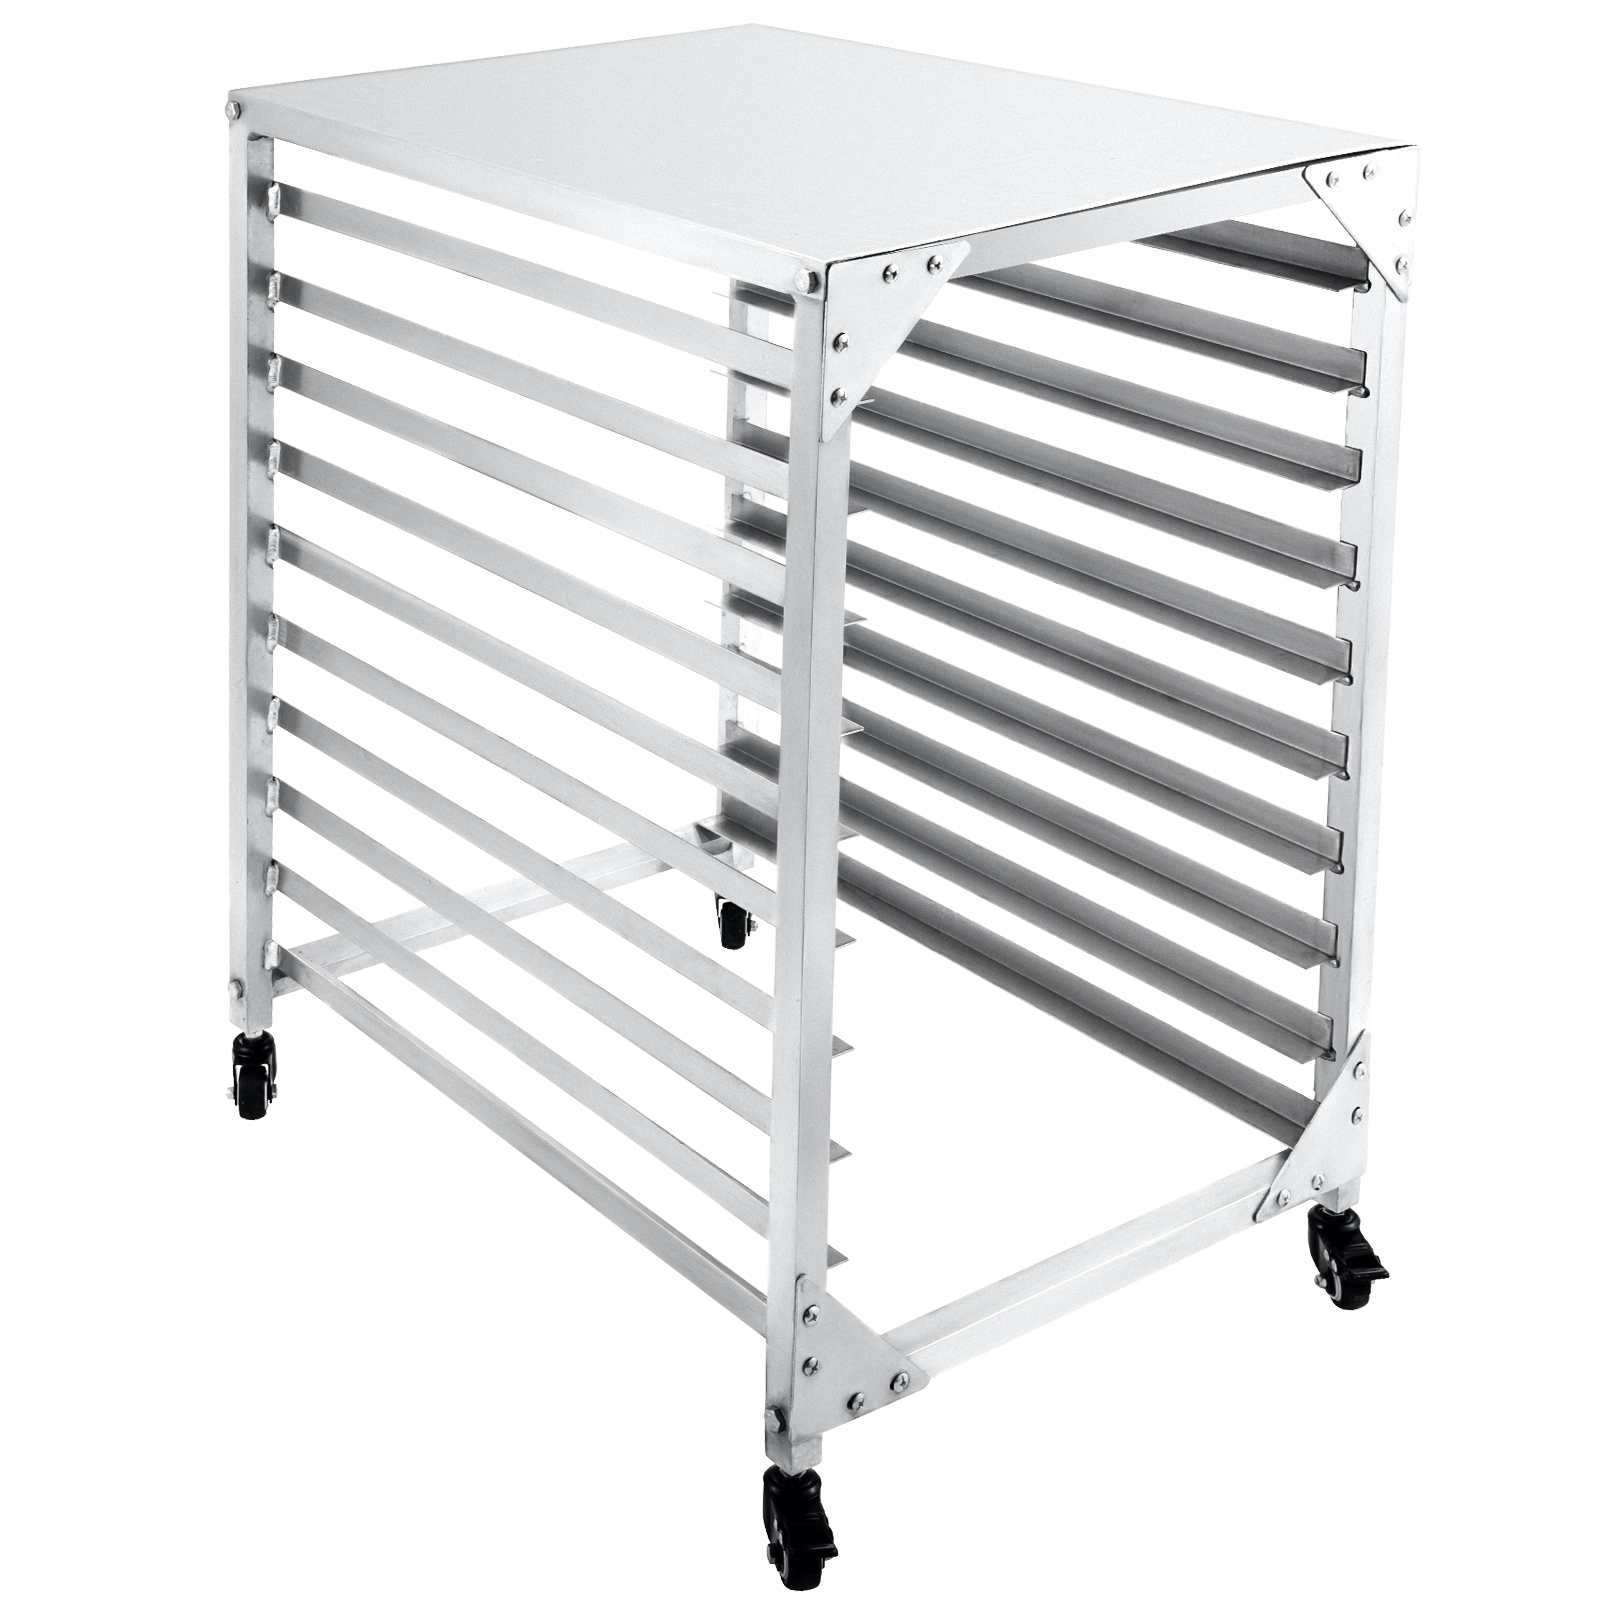 VEVOR Bun Pan Rack 10-Tier Commercial Bakery Racks with Brake Wheels 26 in.  L x 20.3 in. W x 39 in. H Bread Baking Equipment MBPJLZCCHC1058T4RV0 - The  Home Depot